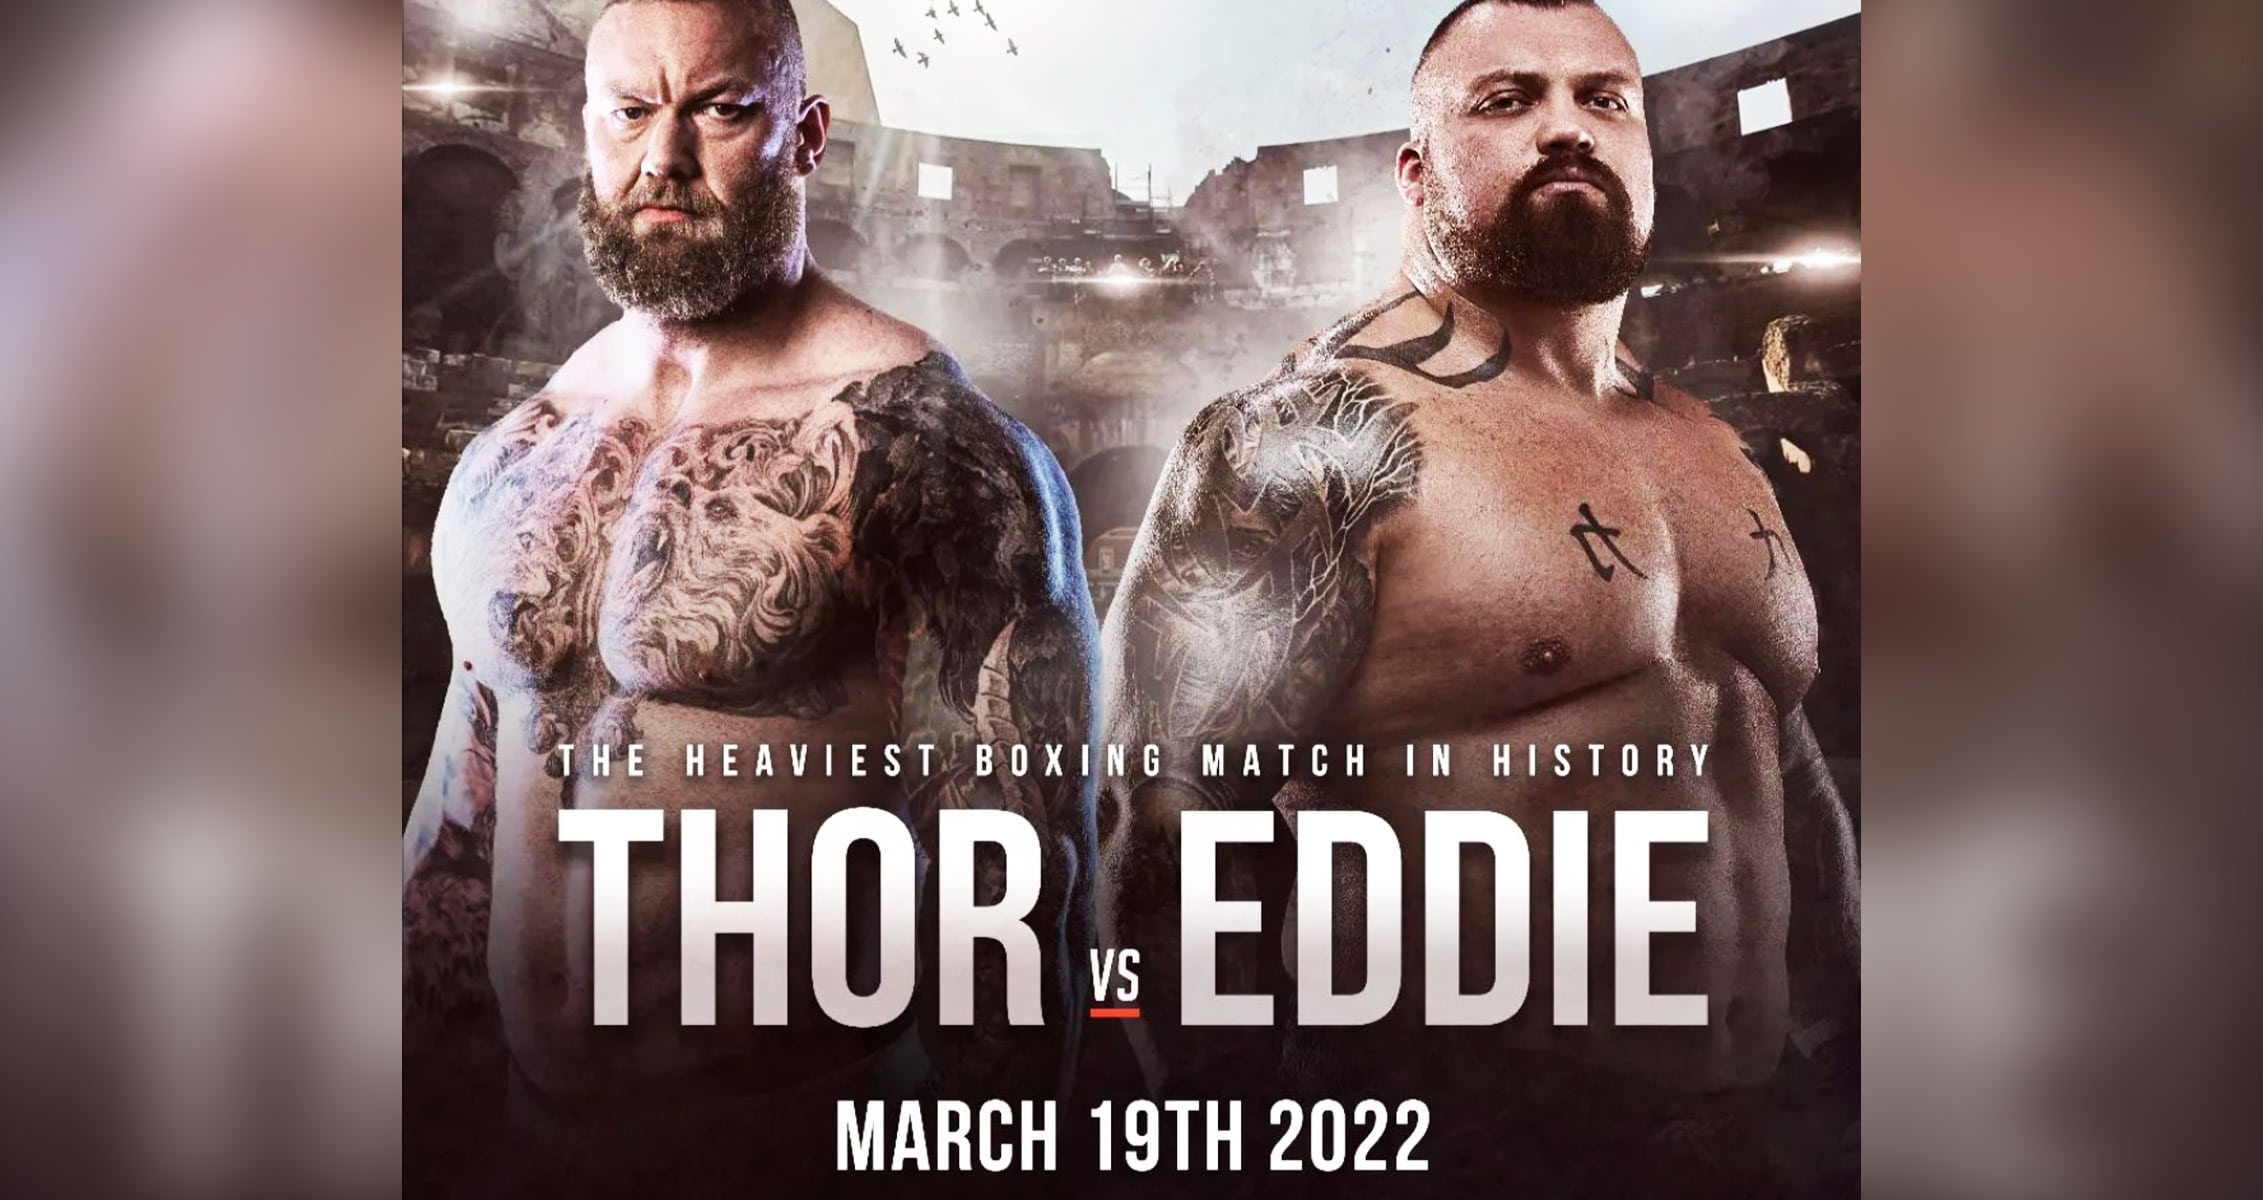 Hafthor bjornsson vs eddie hall boxing match reportedly set for march